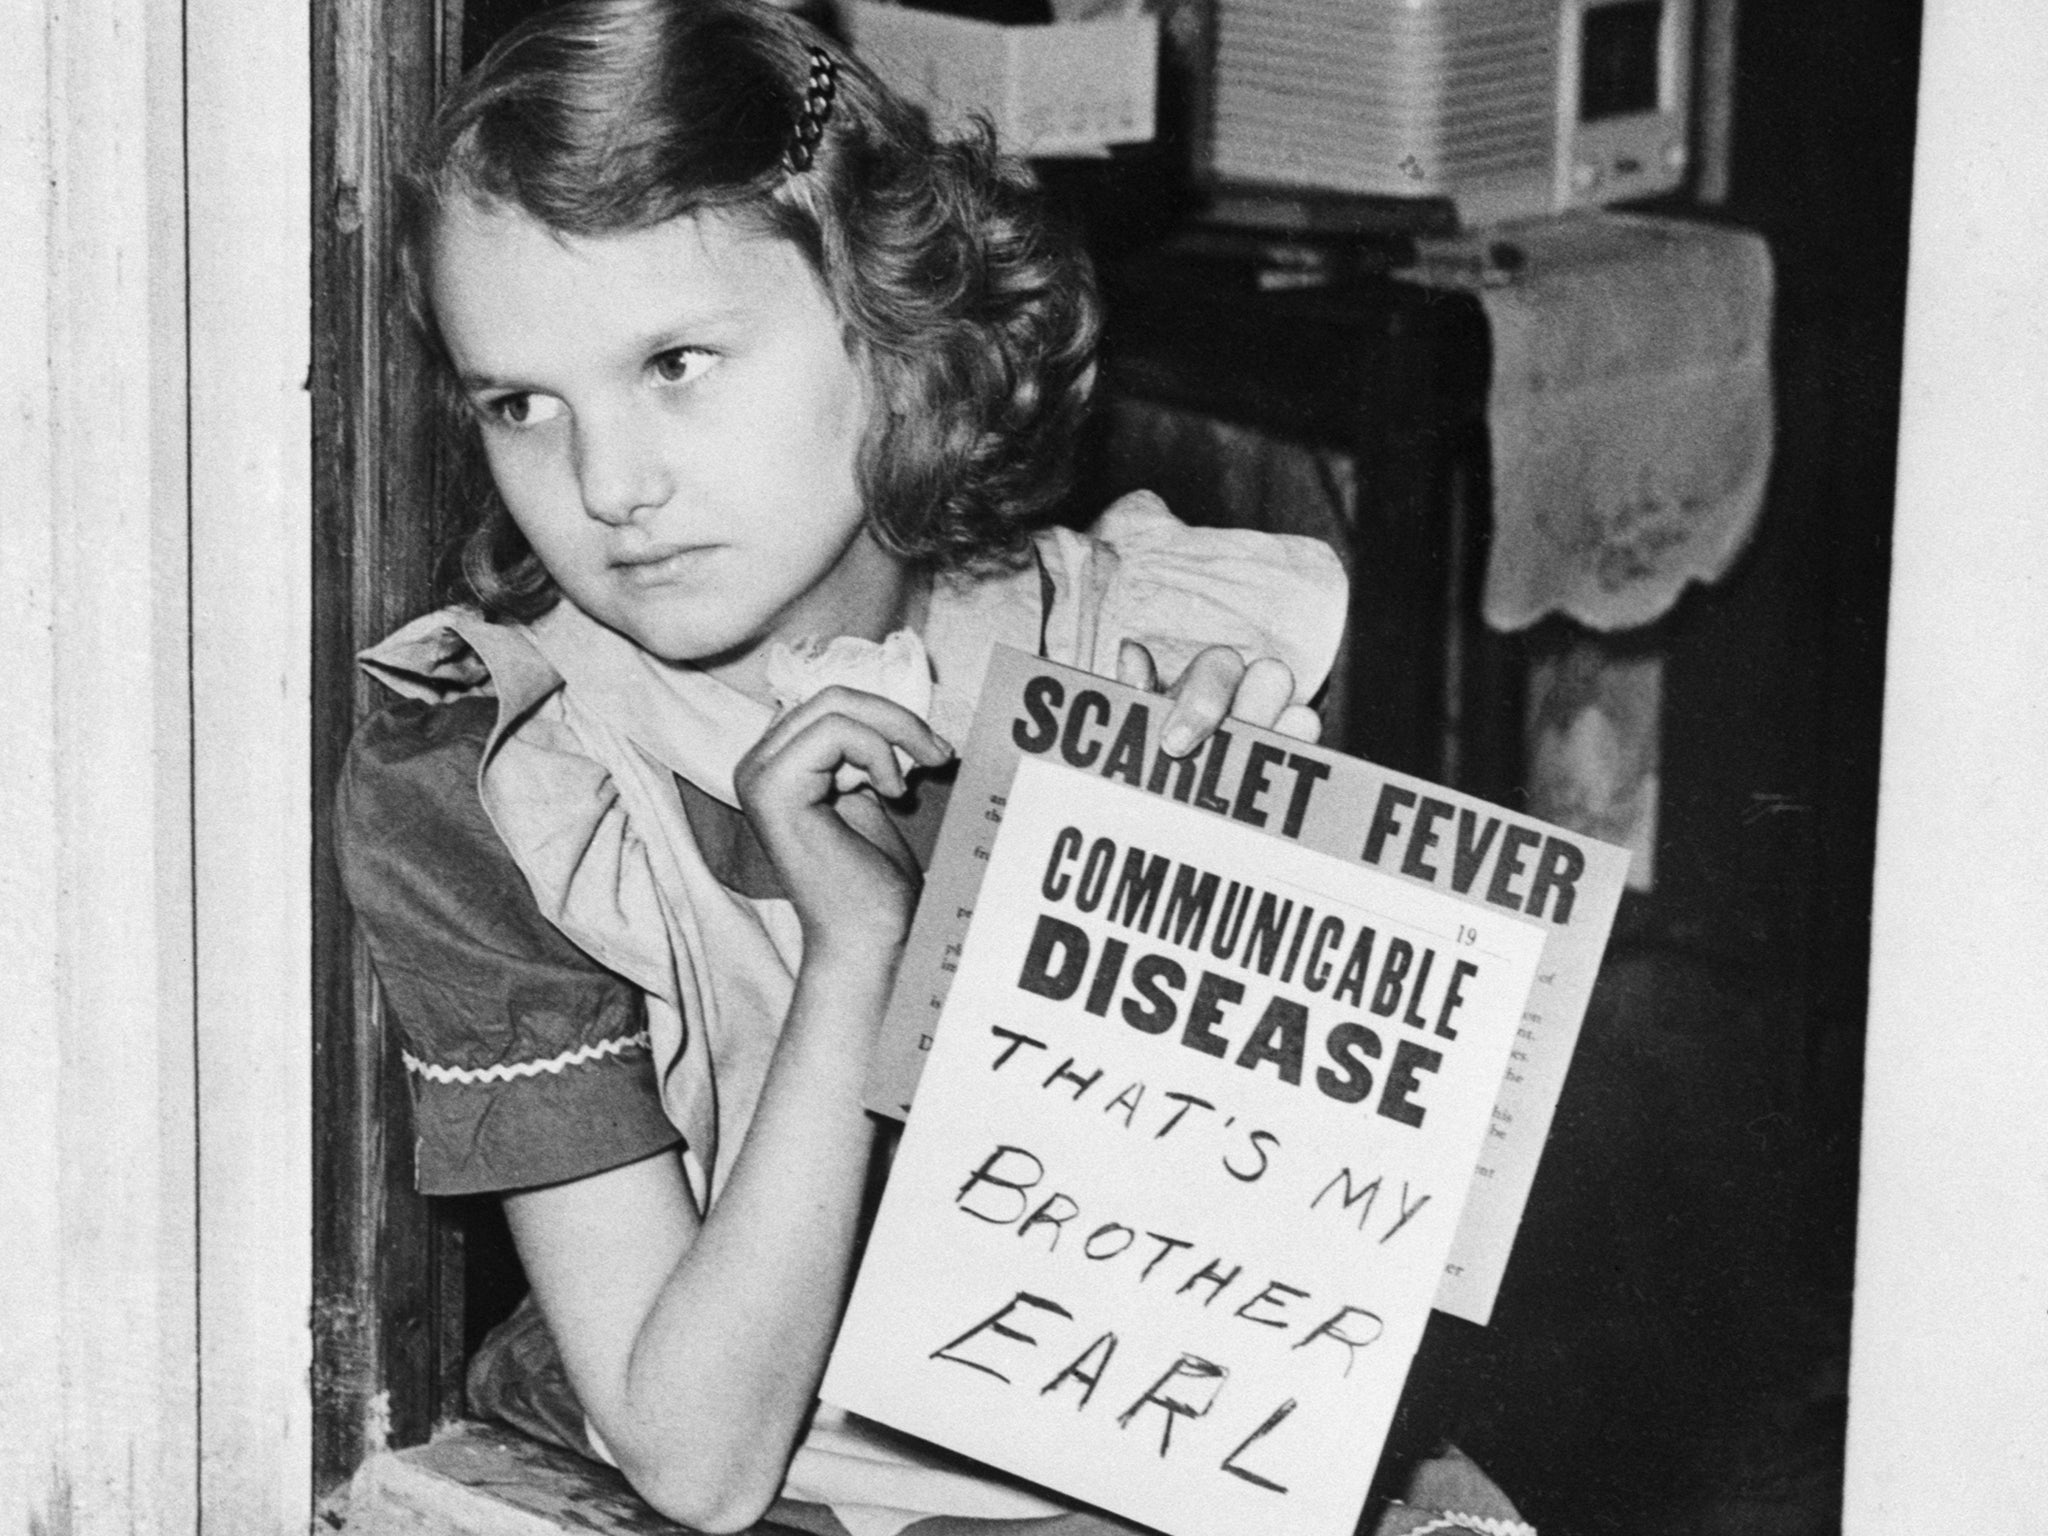 Infectious diseases: Scarlet fever